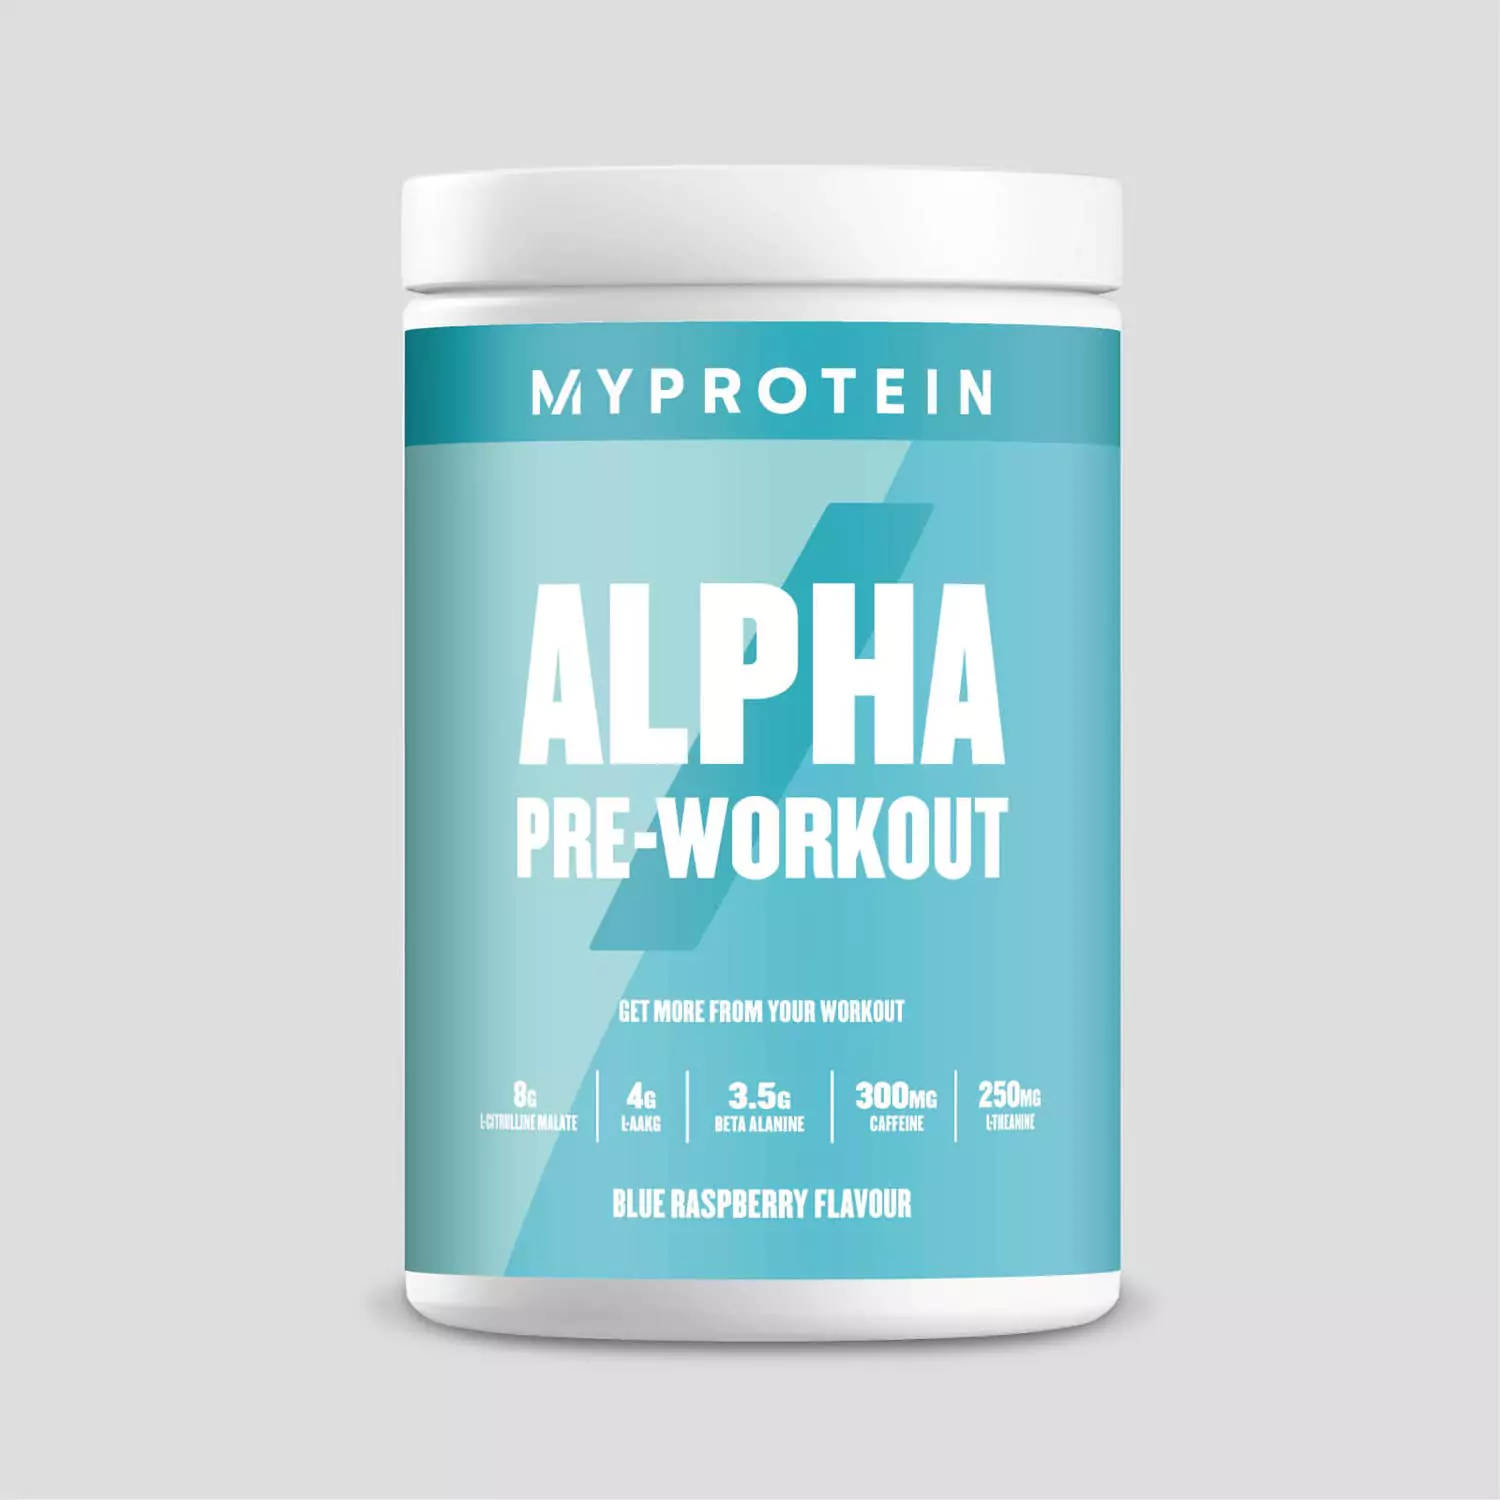 Myprotein Alpha Pre-Workout 600g Discounts and Cashback